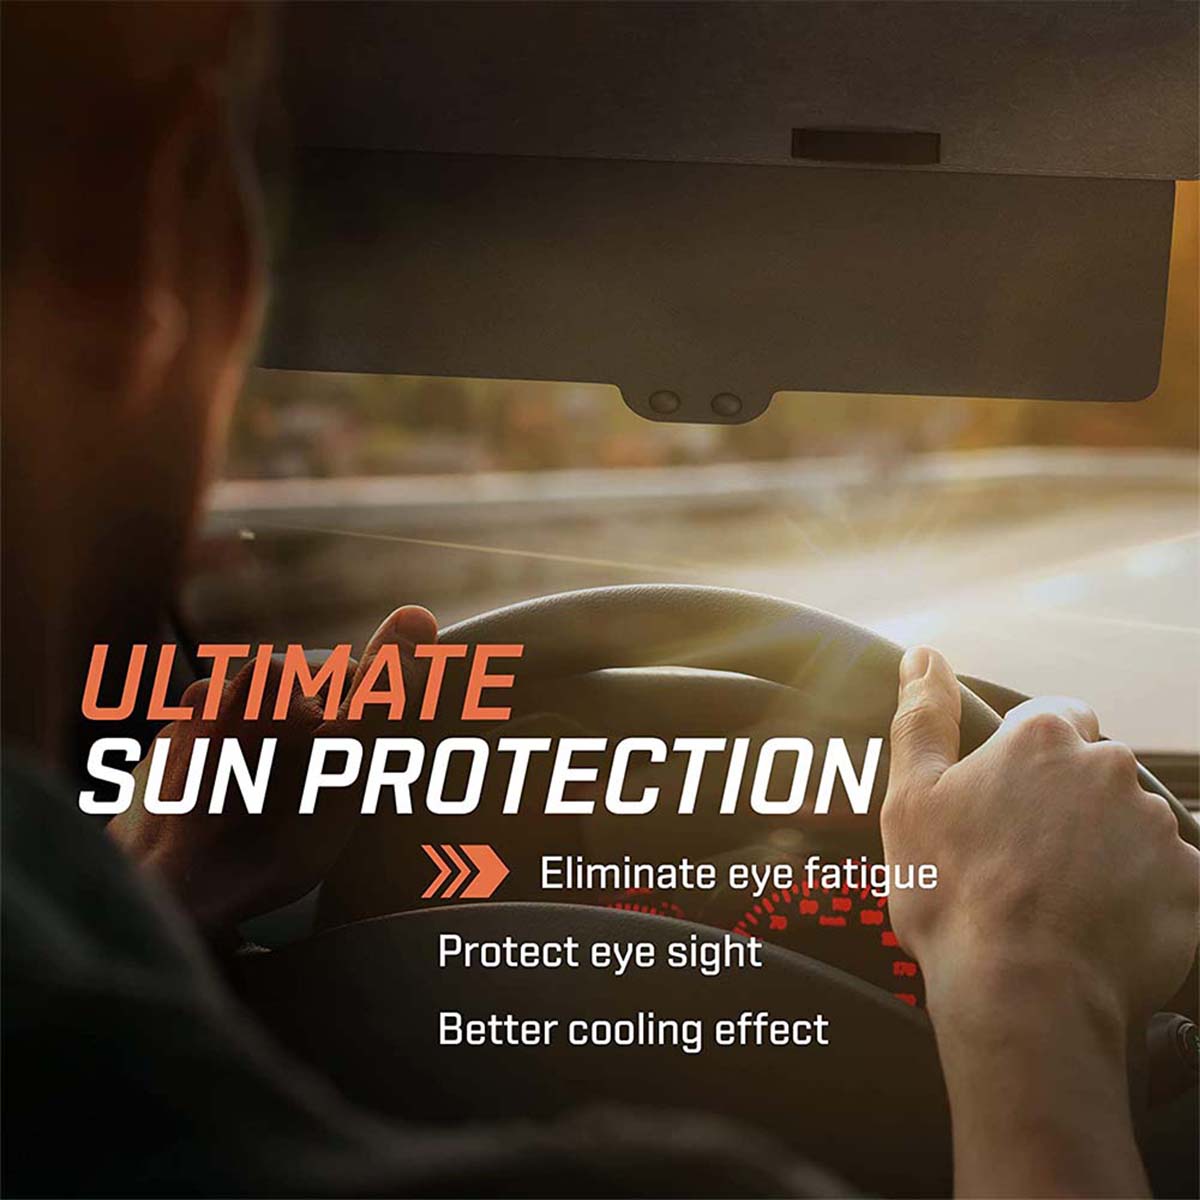 Polarized Sun Visor Sunshade Extender for Car with Polycarbonate Lens, Custom For Your Cars, Anti-Glare Car Sun Visor Protects from Sun Glare, Snow Blindness, UV Rays, Universal for Cars, SUVs PF13999 - Delicate Leather